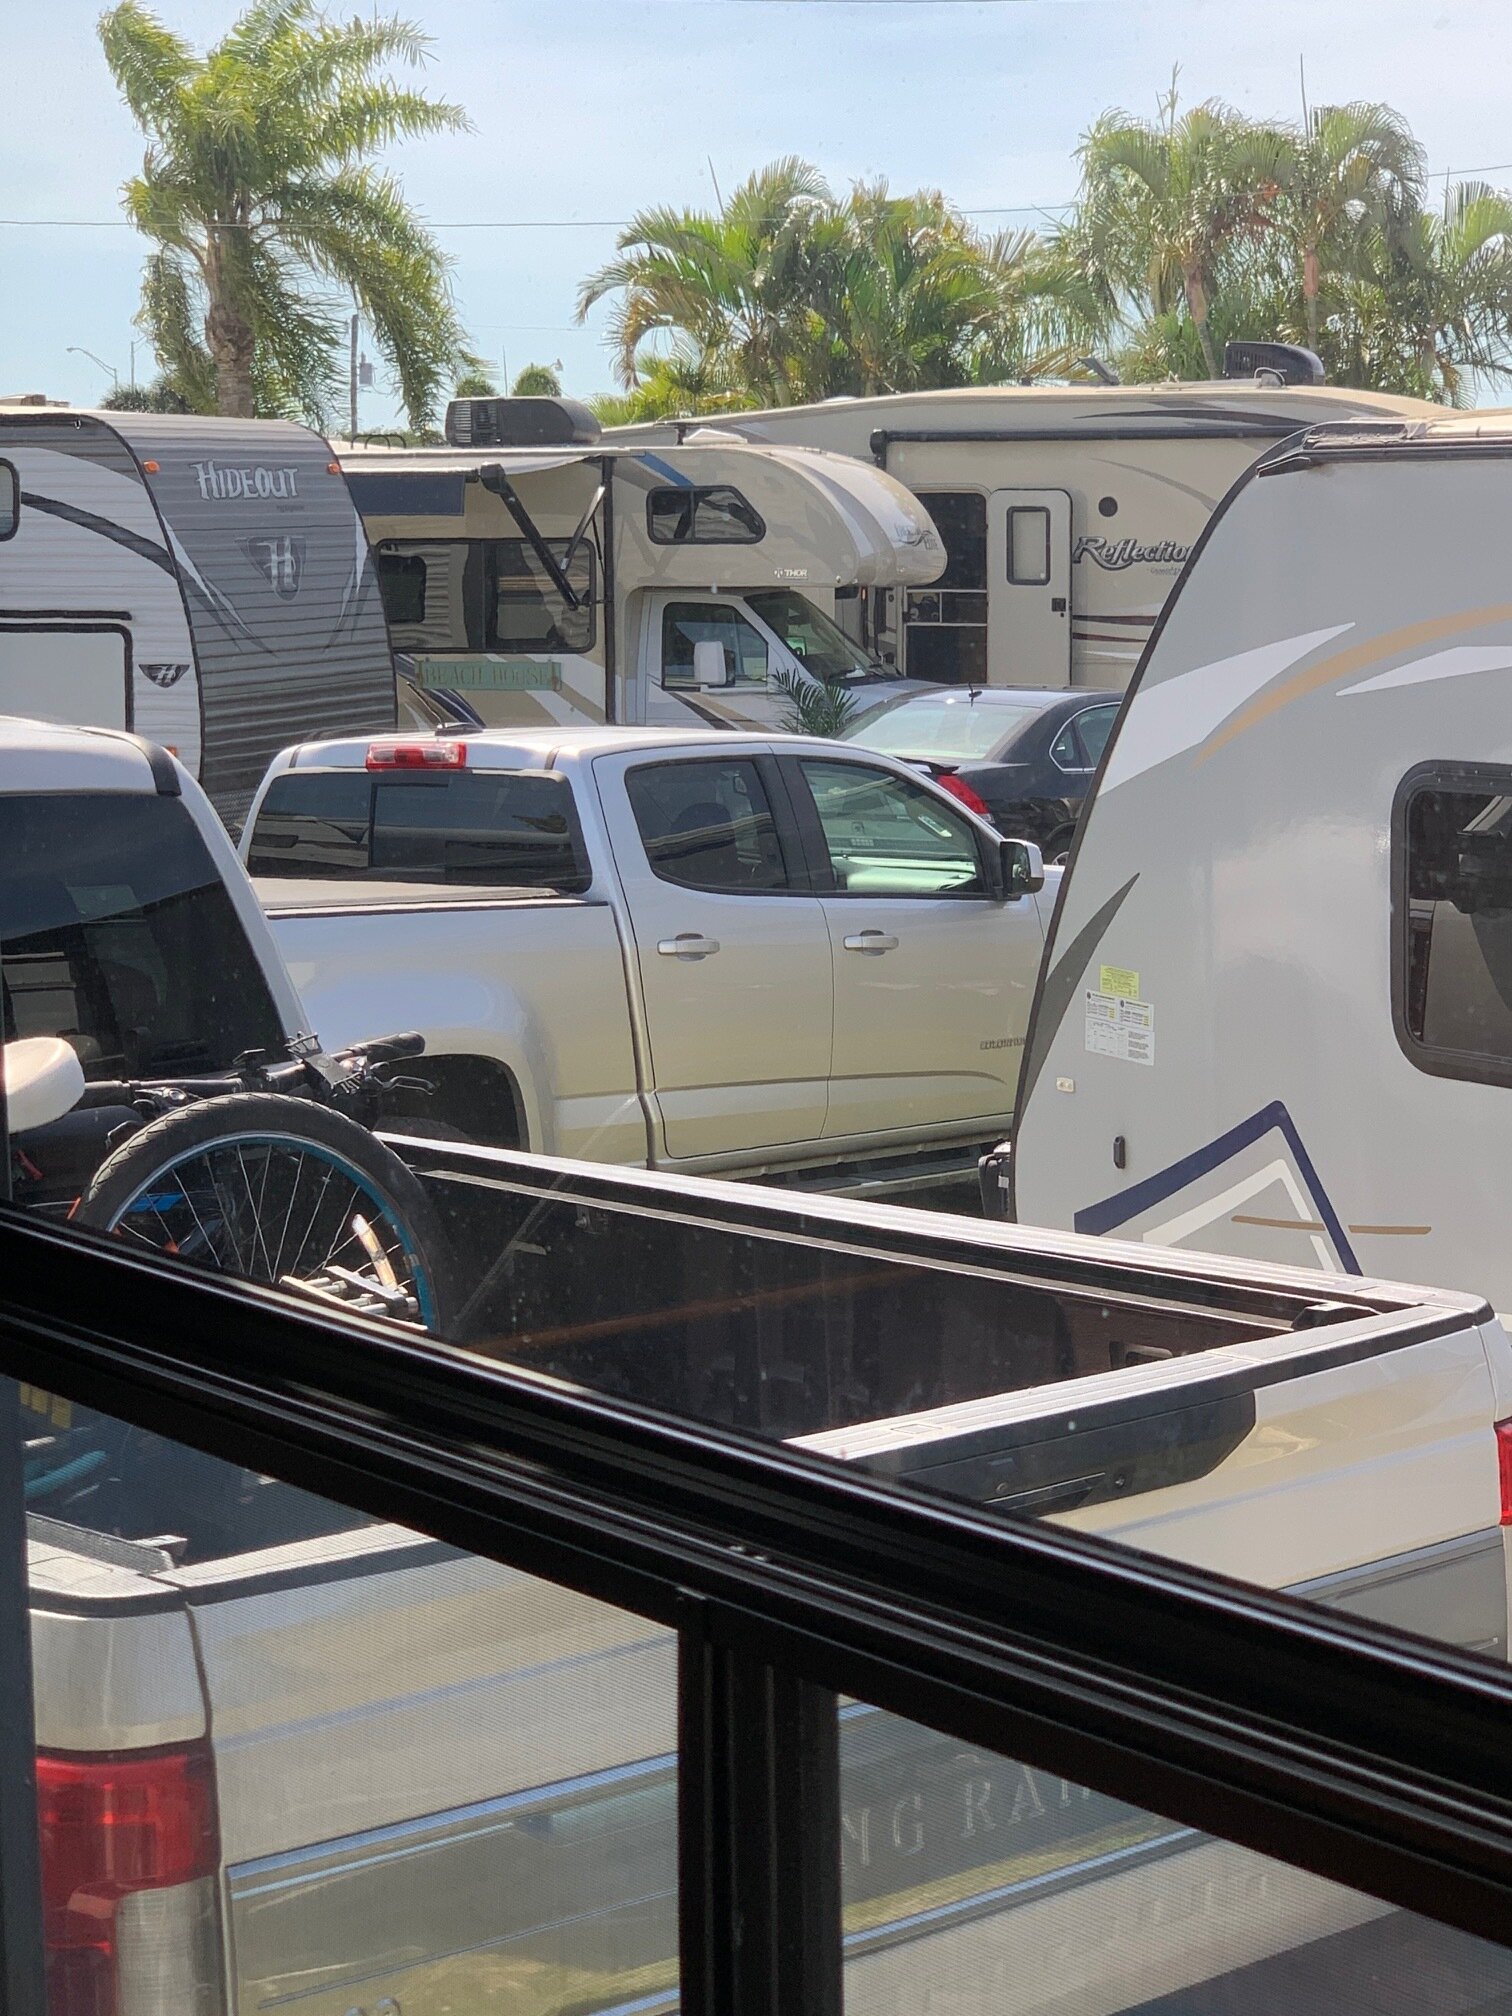  The view from the  front  window of our camper in Ft. Myers shows our most crowded campsite to date. 